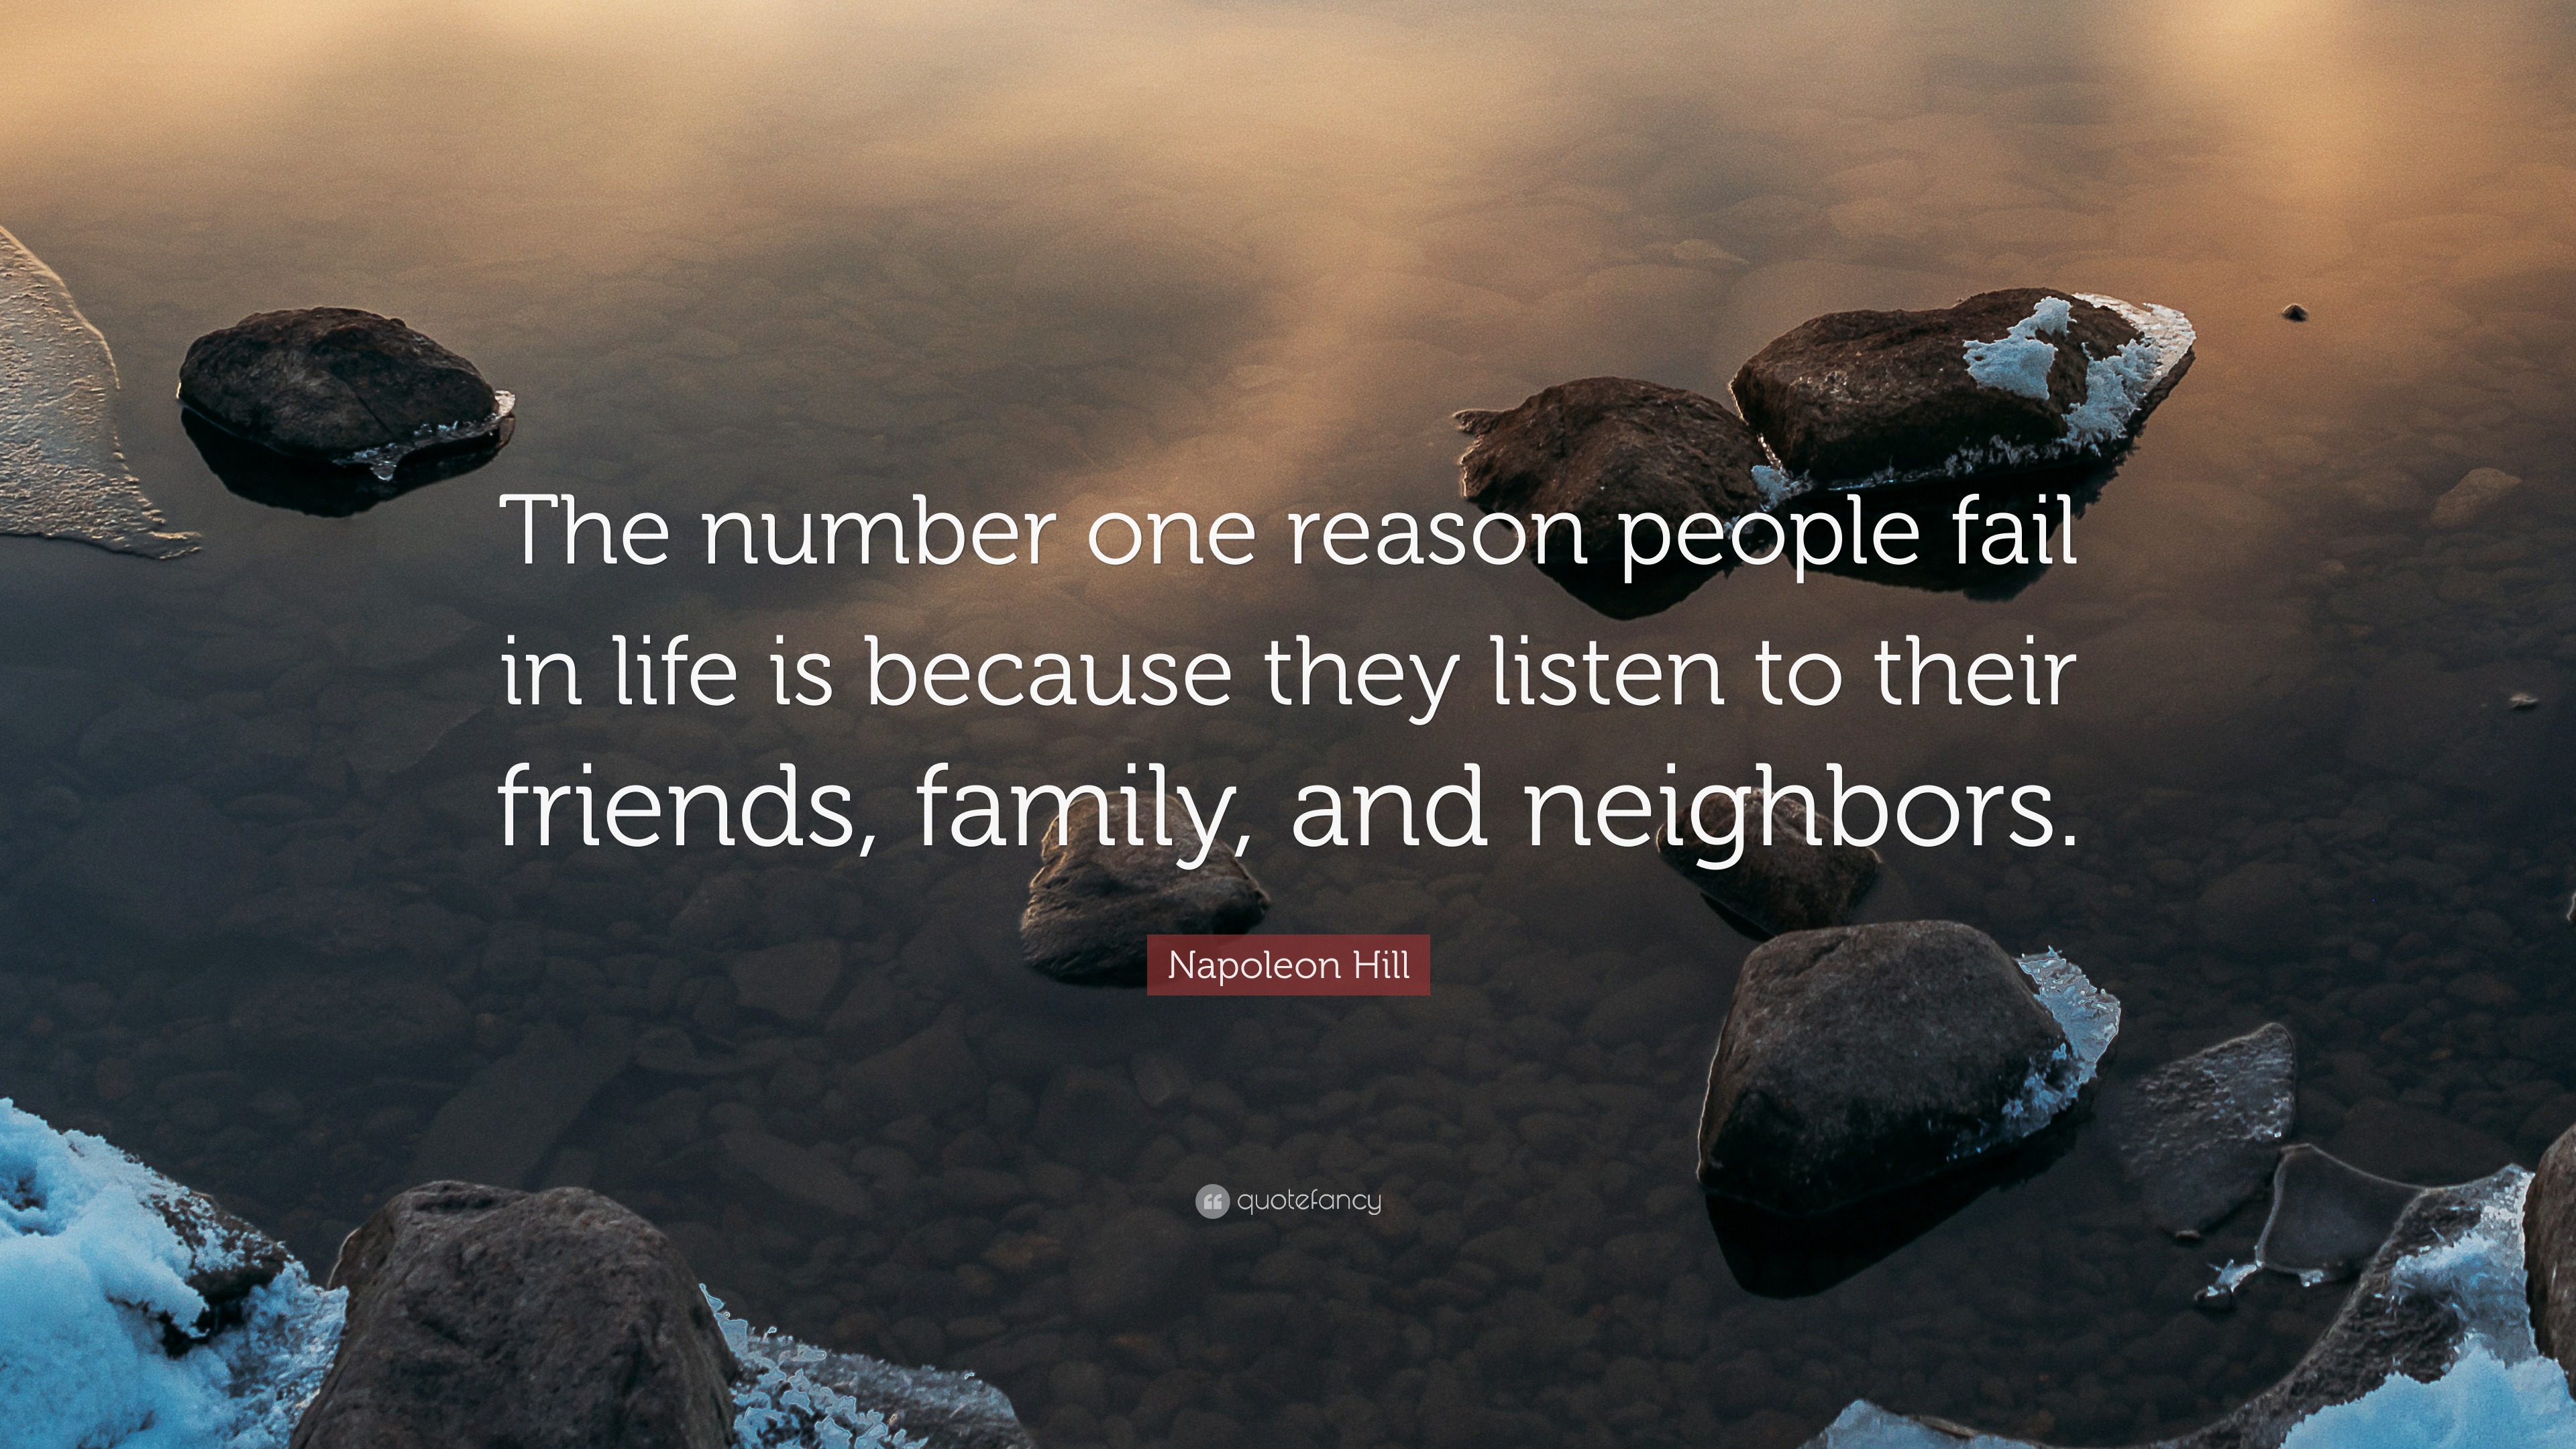 Napoleon Hill Quote: “The number one reason people fail in life is